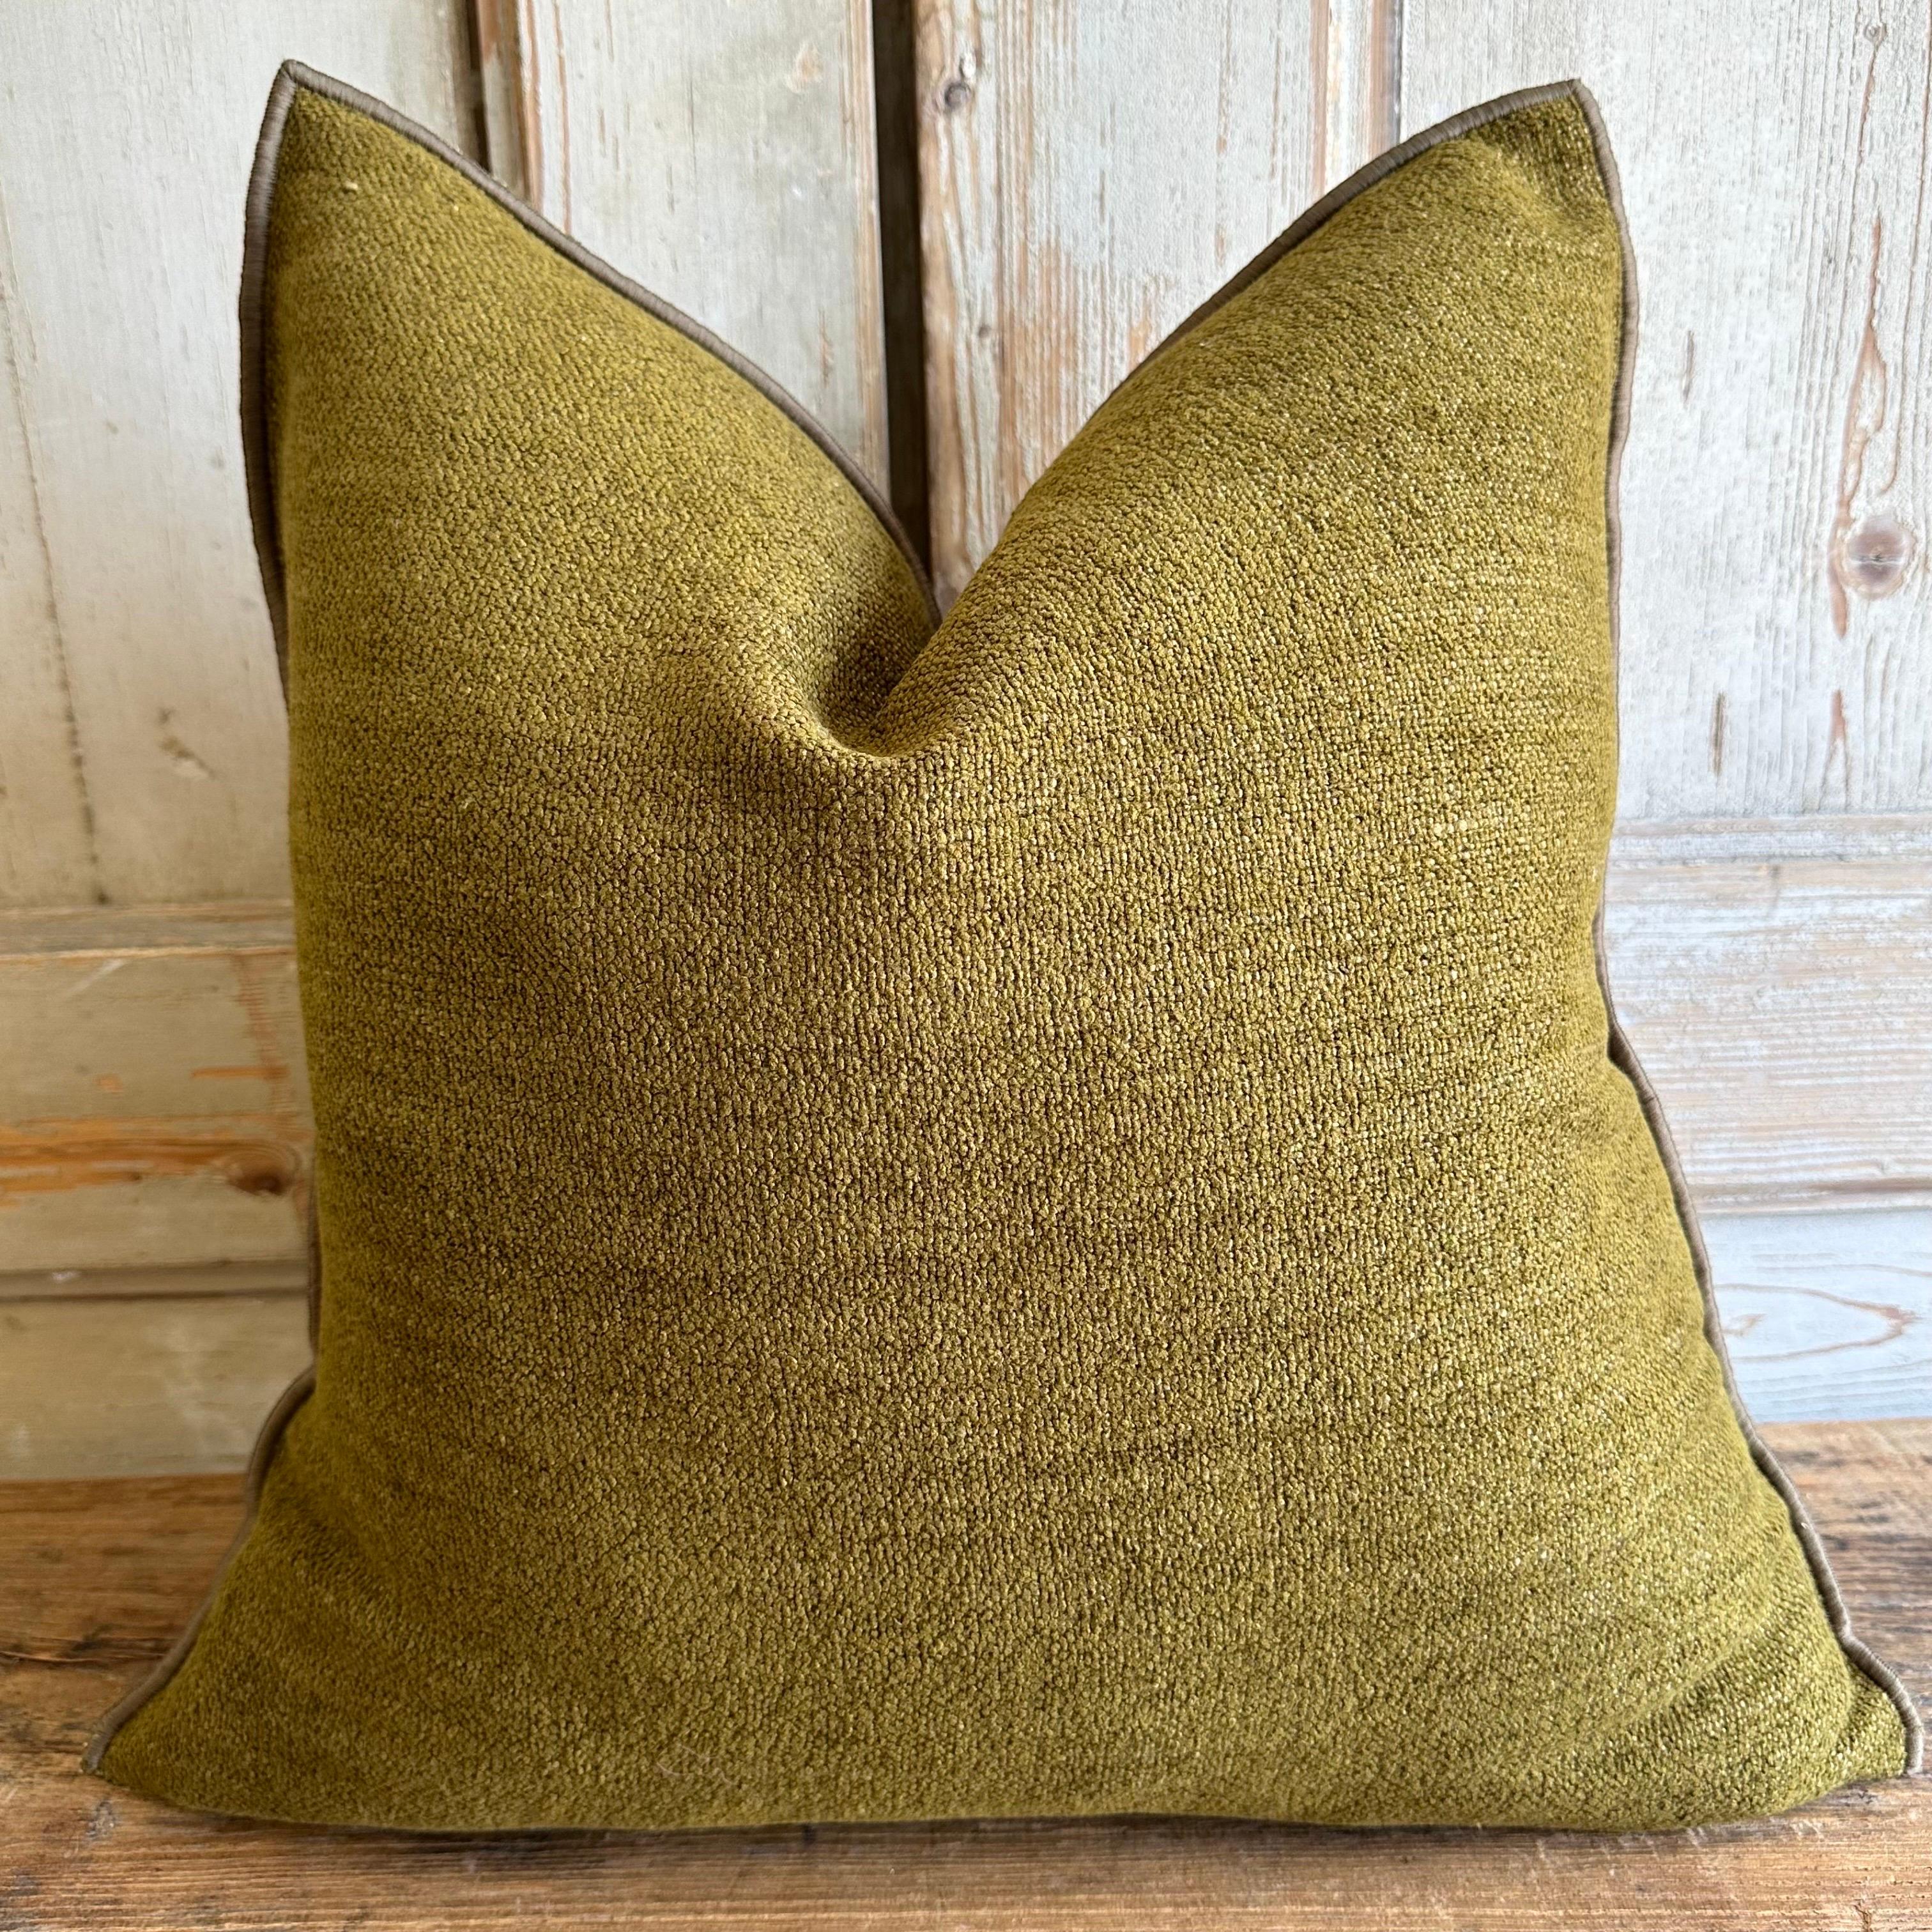  Welcome to bloomhomeinc we stock over 2000 items, please scroll down and click view sellers other items to see more!

Exceptionally soft chenille pillow, made in Paris France.
Color: Bronze (A dark tuscan olive green with vibrance)
Double sided